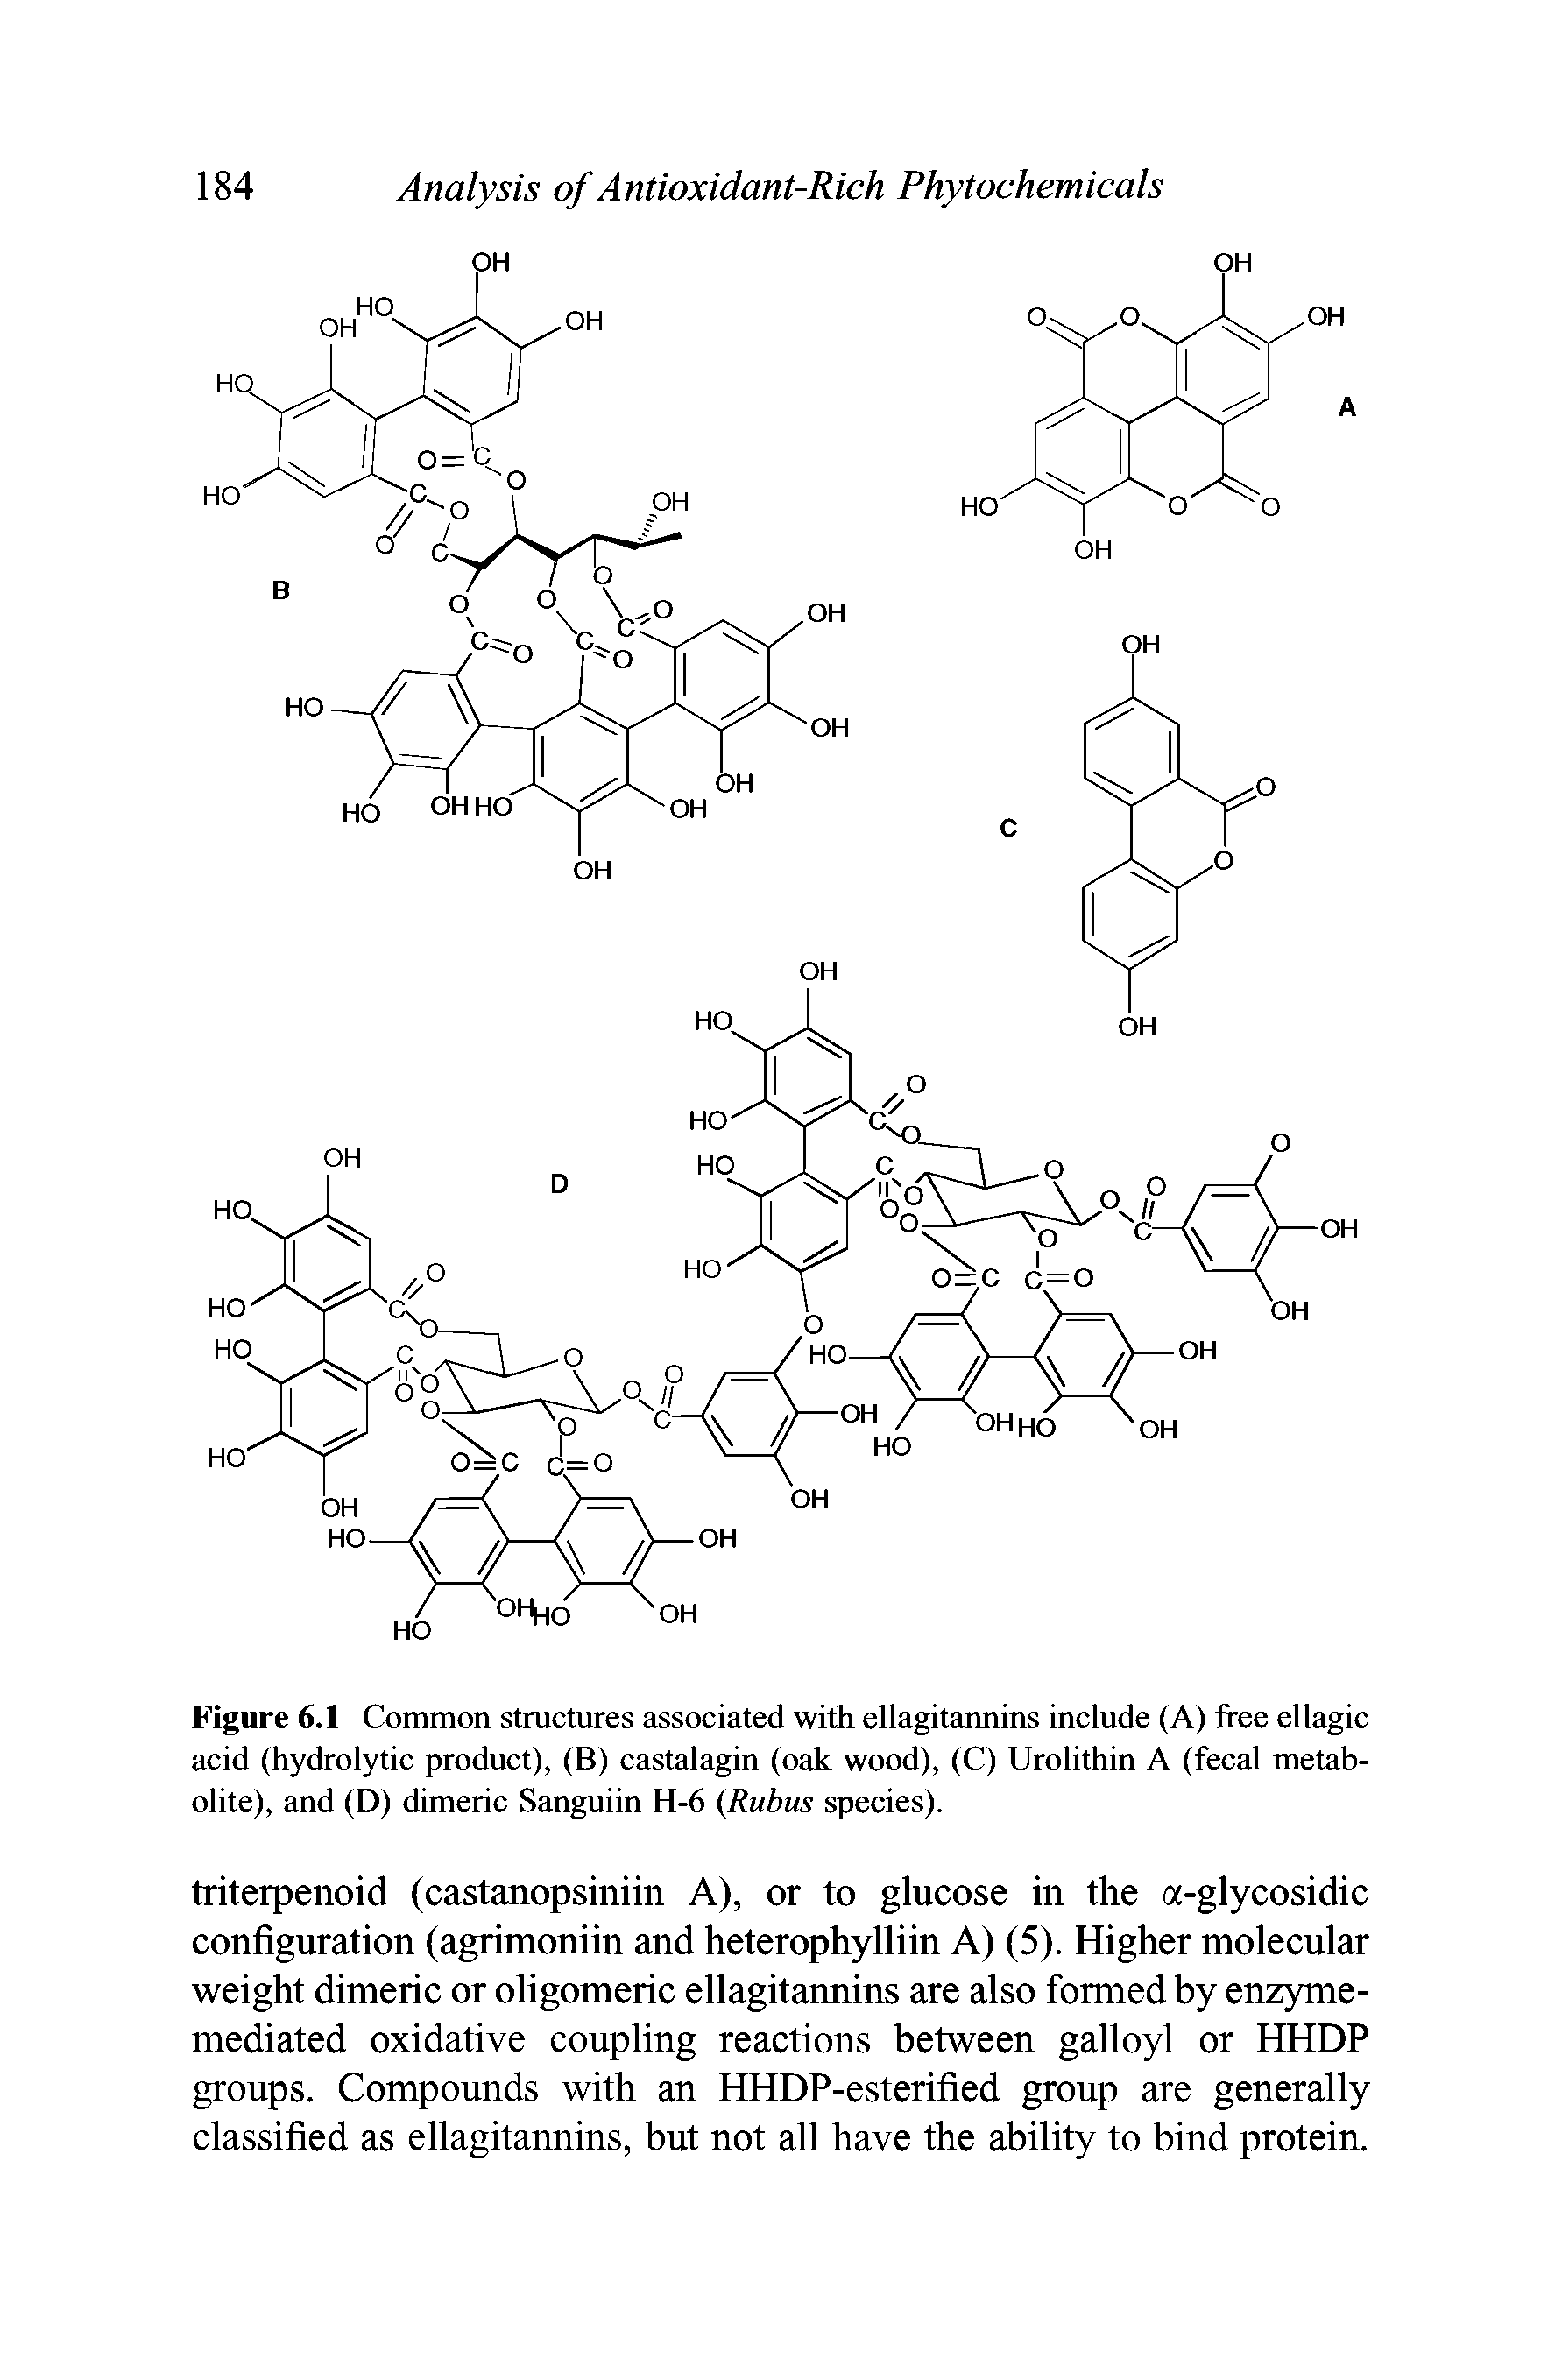 Figure 6.1 Common structures associated with ellagitannins include (A) free ellagic acid (hydrolytic product), (B) castalagin (oak wood), (C) Urolithin A (fecal metabolite), and (D) dimeric Sanguiin H-6 (Rubus species).